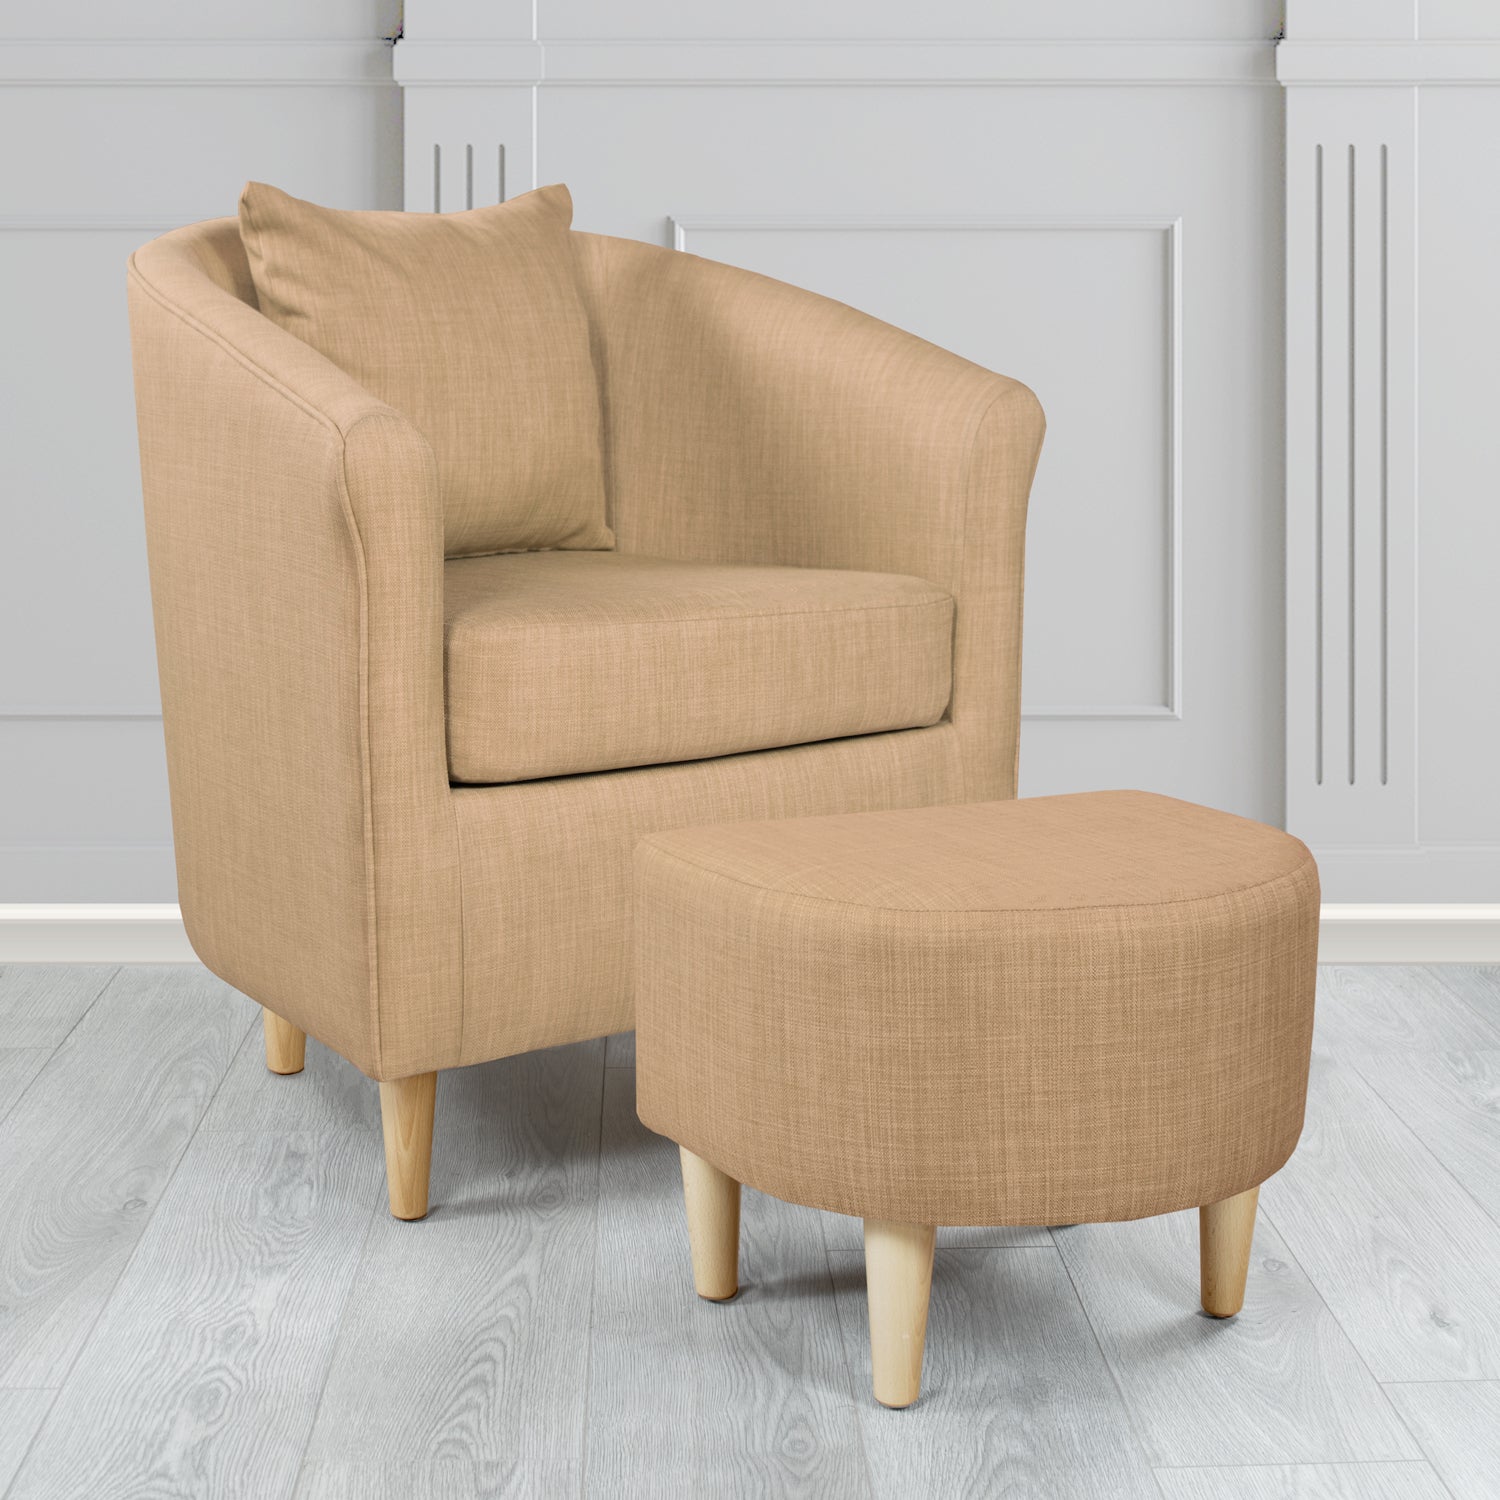 St Tropez Charles Honey Plain Linen Fabric Tub Chair & Footstool Set with Scatter Cushion - The Tub Chair Shop